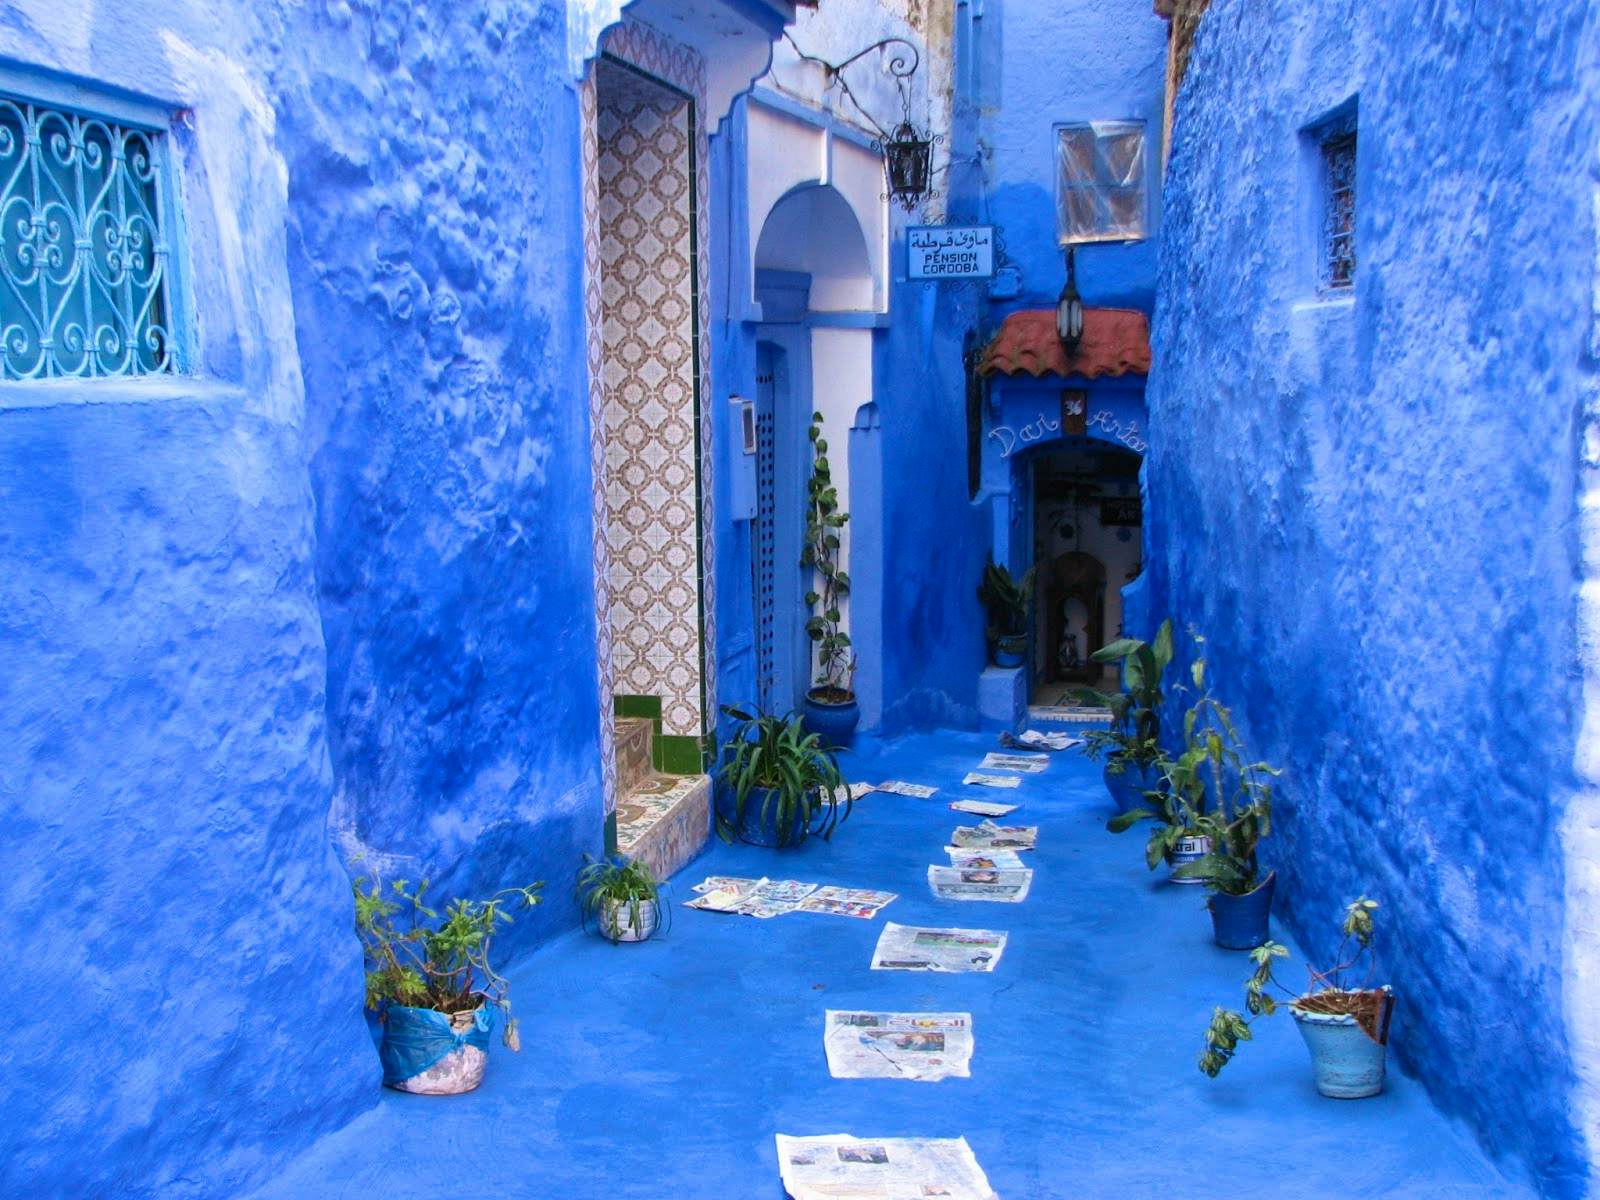 Small-Group Day Tour to Chefchaouen from Fez